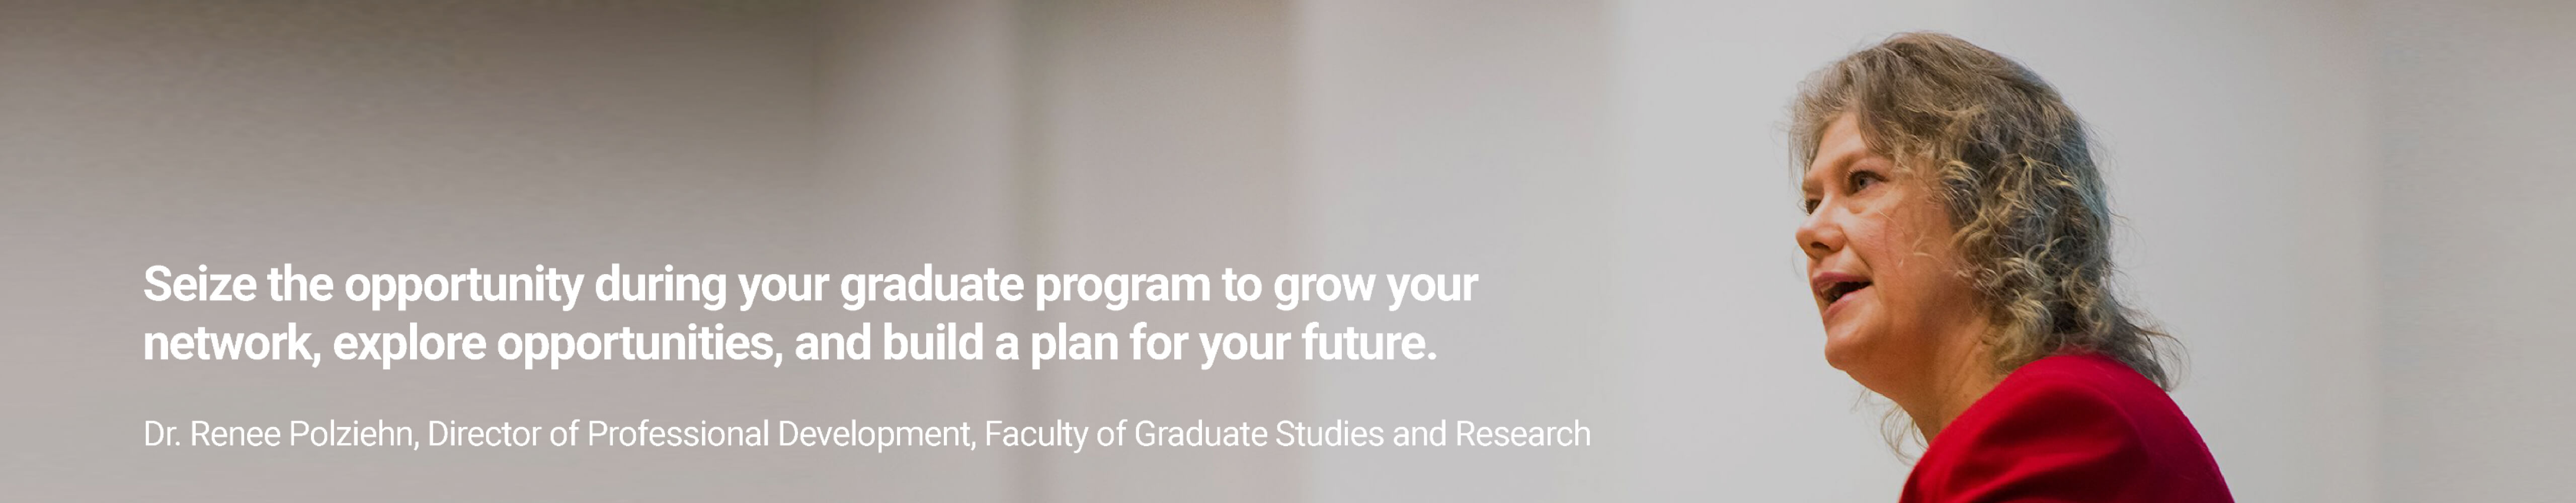 Seize the opportunity during your graduate program to grow your network, explore opportunities, and build a plan for your future. - Dr.Renee Polziehn, Director of Professional Development, Faculty of Graduate Studies and Research